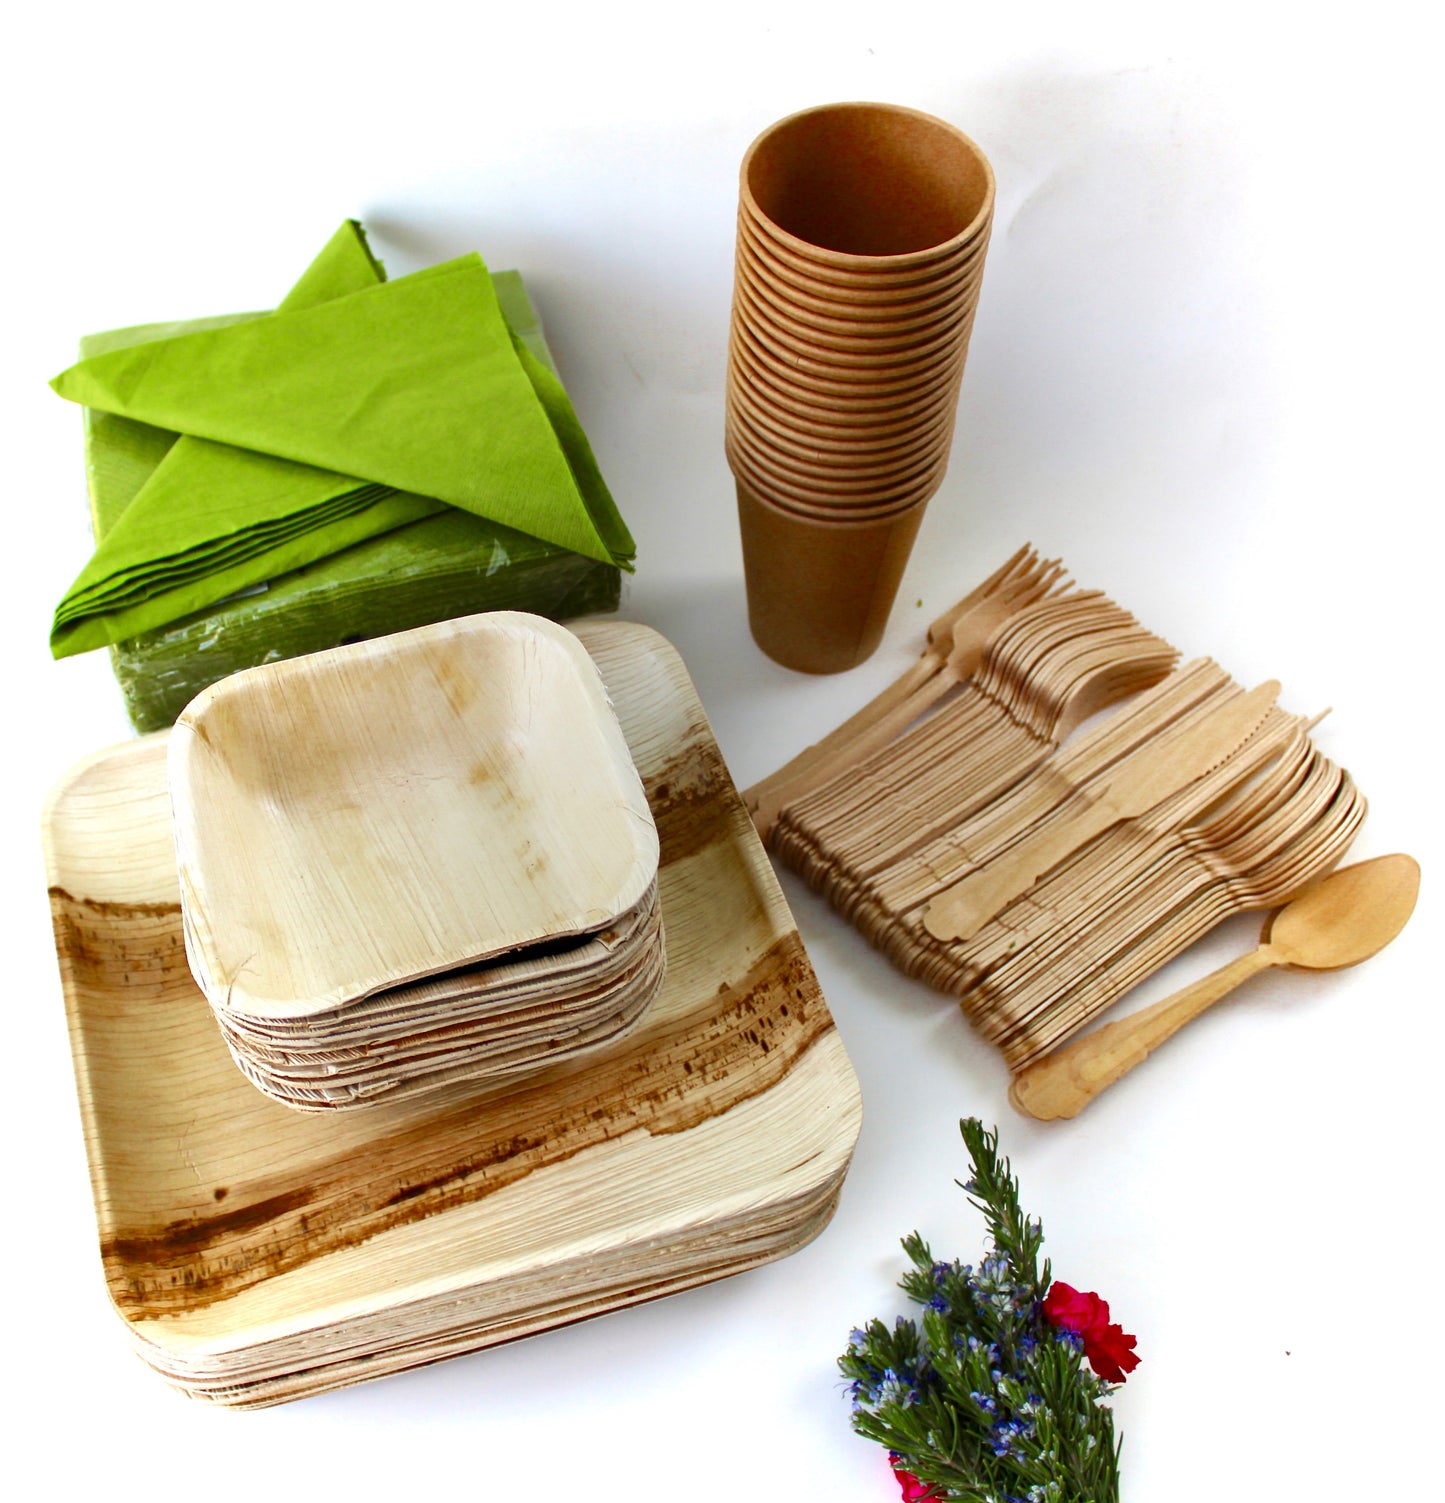 Copy of Bamboo Type Palm Leaf 25 Pic 10"Square  - 25 pice Heart  6"- 25  pic  cup  - 75 pic Cutlery - 50 Pic Napkin